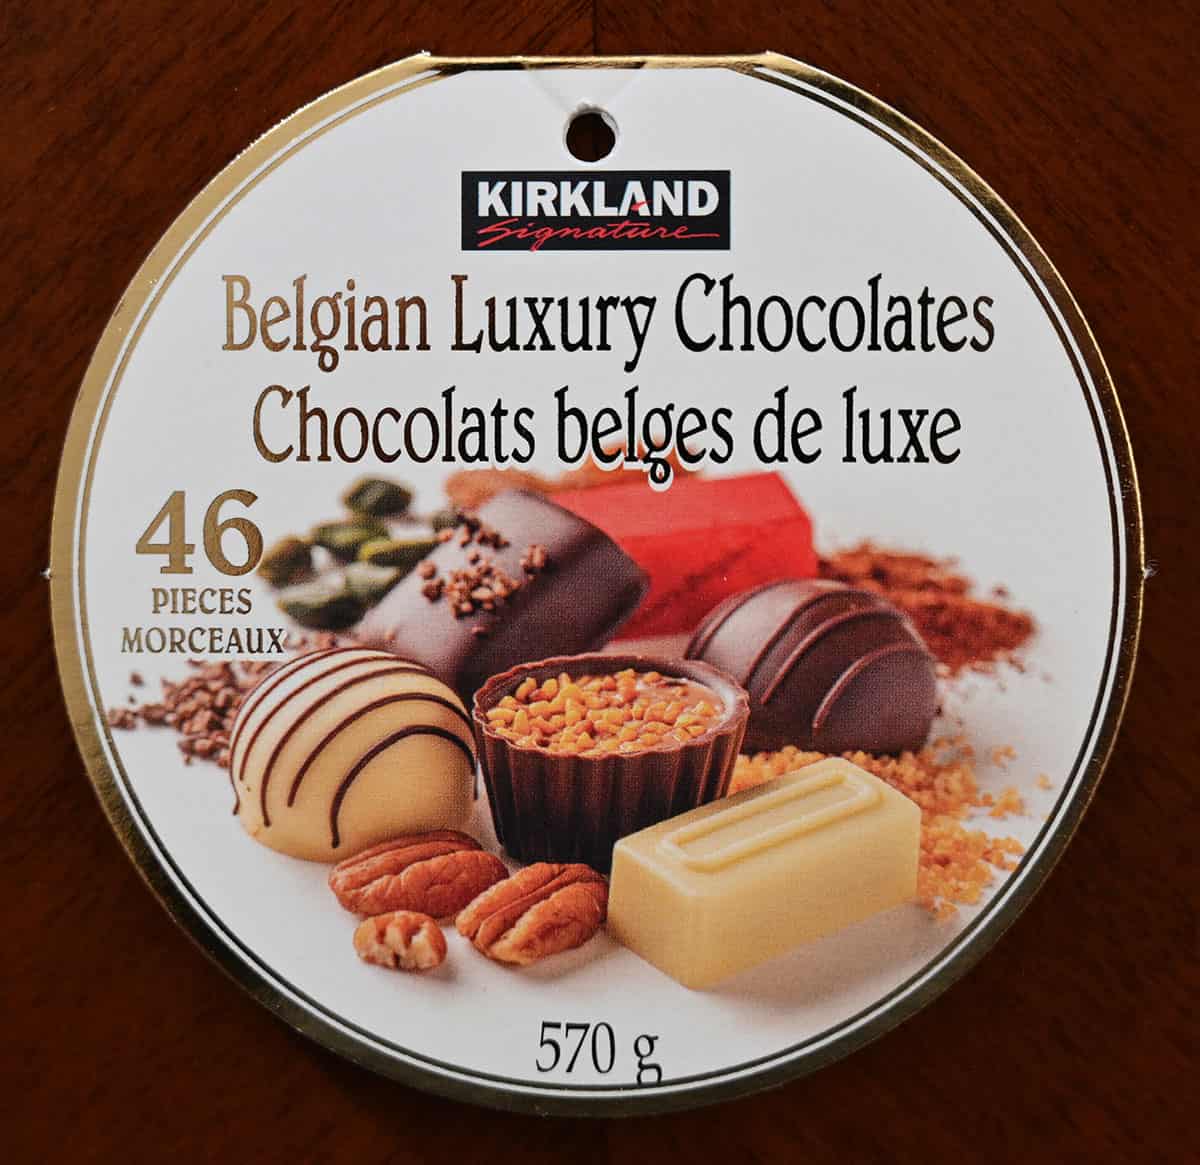 Image of the label from the Chocolates showing there are 46 pieces.